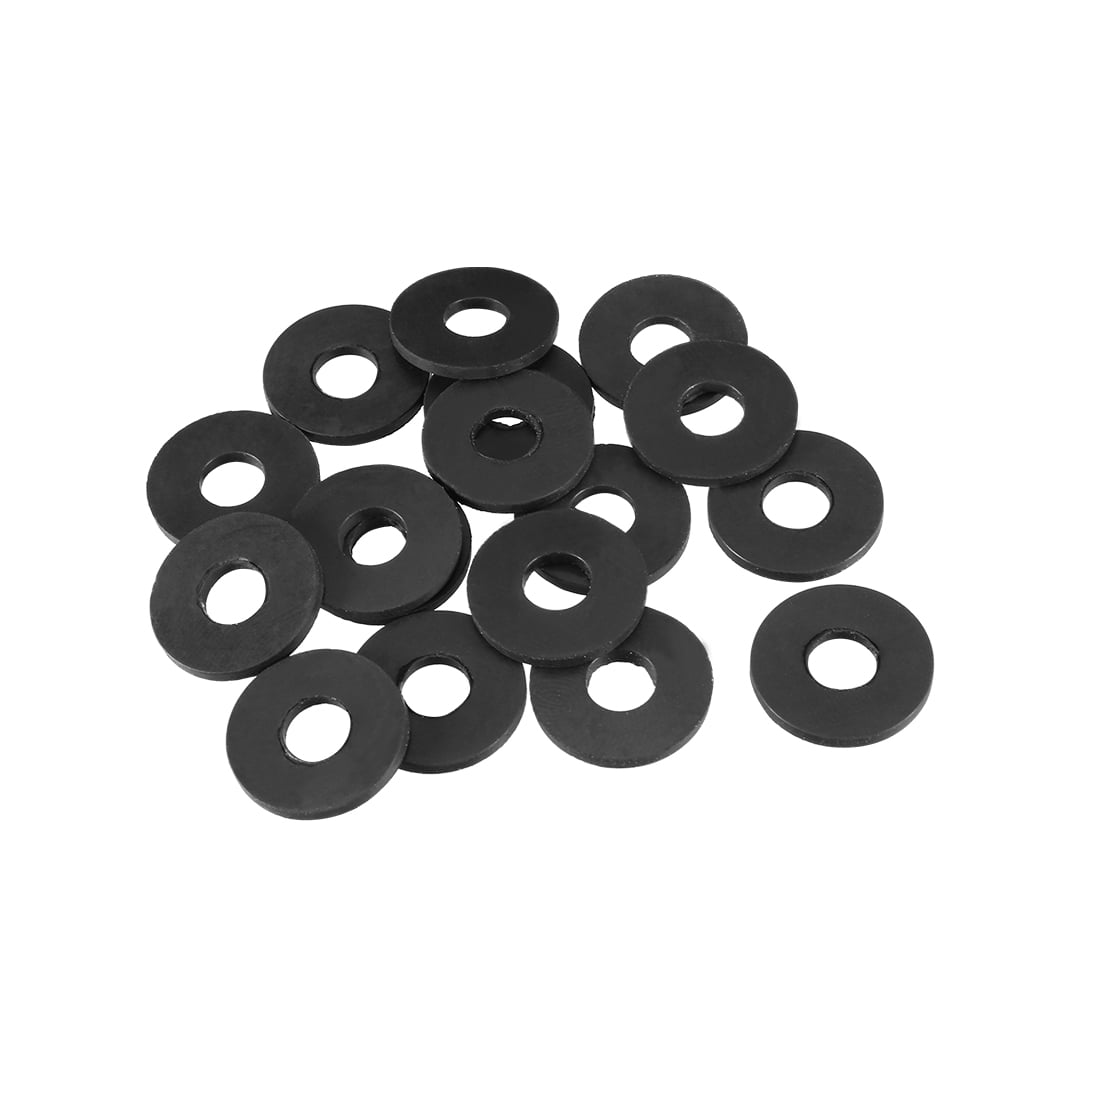 CONNECT 31864 Assorted Washers Set of 800